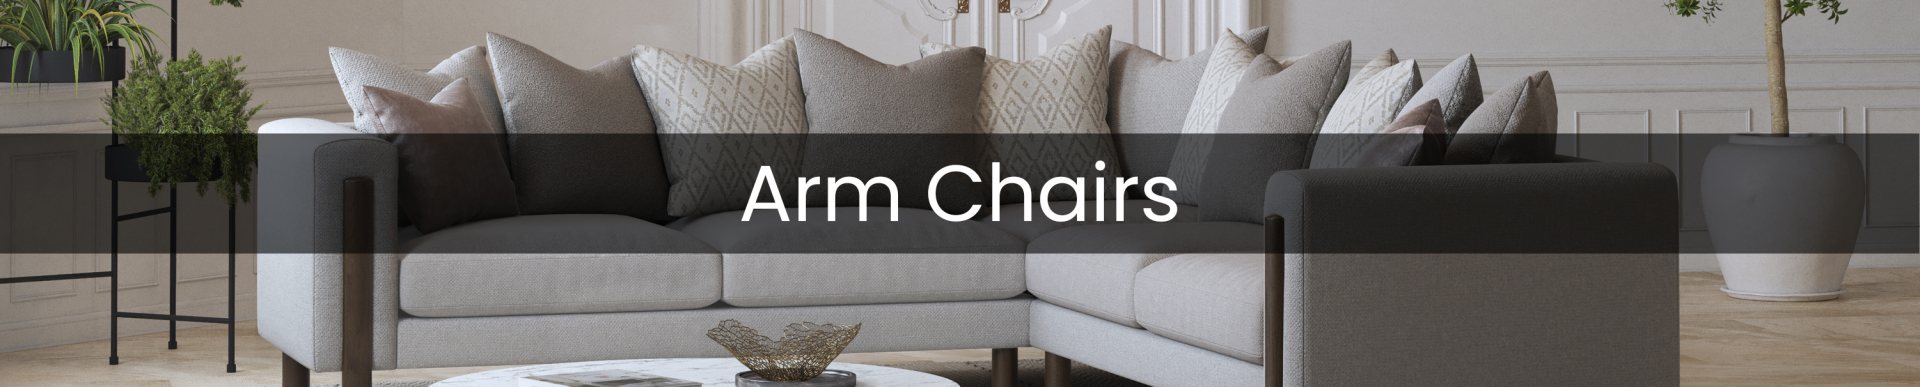 arm chairs